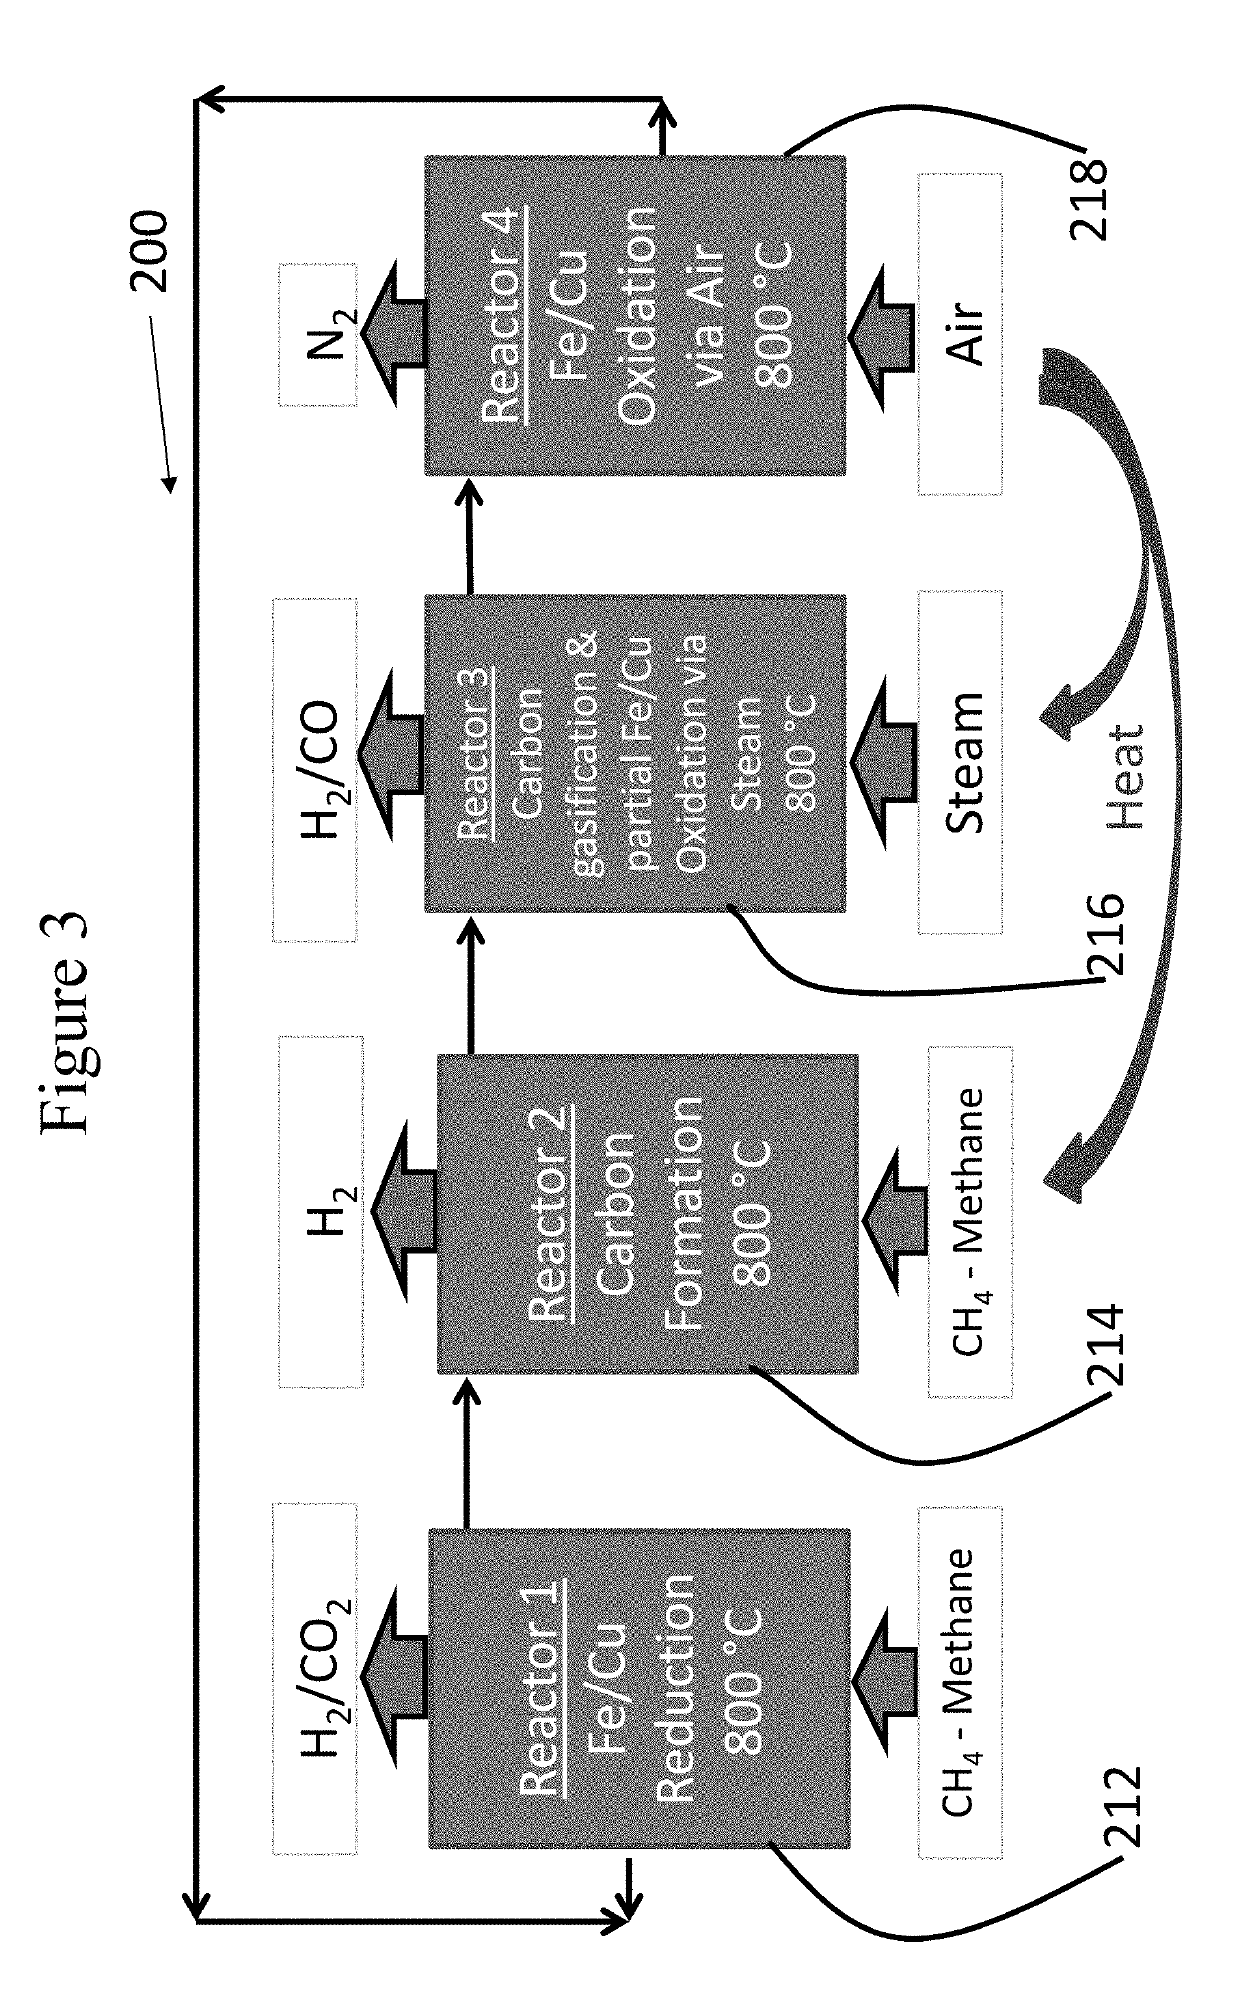 Production of pure hydrogen and synthesis gas or carbon with CUO-Fe2O3 oxygen carriers using chemical looping combustion and methane decomposition/reforming